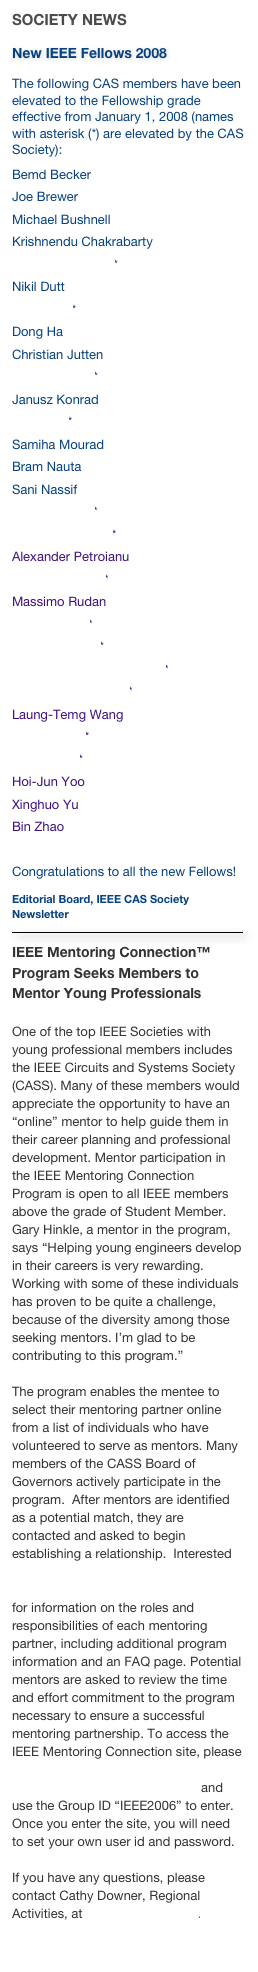 SOCIETY NEWS
New IEEE Fellows 2008
The following CAS members have been elevated to the Fellowship grade effective from January 1, 2008 (names with asterisk (*) are elevated by the CAS Society): 
Bemd BeckerJoe BrewerMichael Bushnell 
Krishnendu ChakrabartyPau-Choo Chung*Nikil Dutt 
Ling Guan*Dong Ha
Christian JuttenMing-Dou Ker*Janusz KonradNam Ling*
Samiha Mourad
Bram Nauta
Sani NassifLevent Onural*Fernando Pereira*Alexander PetroianuMarkku Renfors*Massimo RudanYvon Savaria*Jyuo-Min Shyu*Rui Paulo da Silva Martins*Sergios Theodoridis*Laung-Temg WangJacob White*
Ja-Ling Wu*Hoi-Jun YooXinghuo YuBin Zhao
Congratulations to all the new Fellows!
Editorial Board, IEEE CAS Society Newsletter
￼
IEEE Mentoring Connection™ Program Seeks Members to Mentor Young Professionals

One of the top IEEE Societies with young professional members includes the IEEE Circuits and Systems Society (CASS). Many of these members would appreciate the opportunity to have an “online” mentor to help guide them in their career planning and professional development. Mentor participation in the IEEE Mentoring Connection Program is open to all IEEE members above the grade of Student Member.  Gary Hinkle, a mentor in the program, says “Helping young engineers develop in their careers is very rewarding.  Working with some of these individuals has proven to be quite a challenge, because of the diversity among those seeking mentors. I’m glad to be contributing to this program.”
The program enables the mentee to select their mentoring partner online from a list of individuals who have volunteered to serve as mentors. Many members of the CASS Board of Governors actively participate in the program.  After mentors are identified as a potential match, they are contacted and asked to begin establishing a relationship.  Interested members can visit http://www.ieee.org/web/membership/mentoring/index.html for information on the roles and responsibilities of each mentoring partner, including additional program information and an FAQ page. Potential mentors are asked to review the time and effort commitment to the program necessary to ensure a successful mentoring partnership. To access the IEEE Mentoring Connection site, please go to http://www.mentoringconnection.com and use the Group ID “IEEE2006” to enter. Once you enter the site, you will need to set your own user id and password.If you have any questions, please contact Cathy Downer, Regional Activities, at c.downer@ieee.org.
